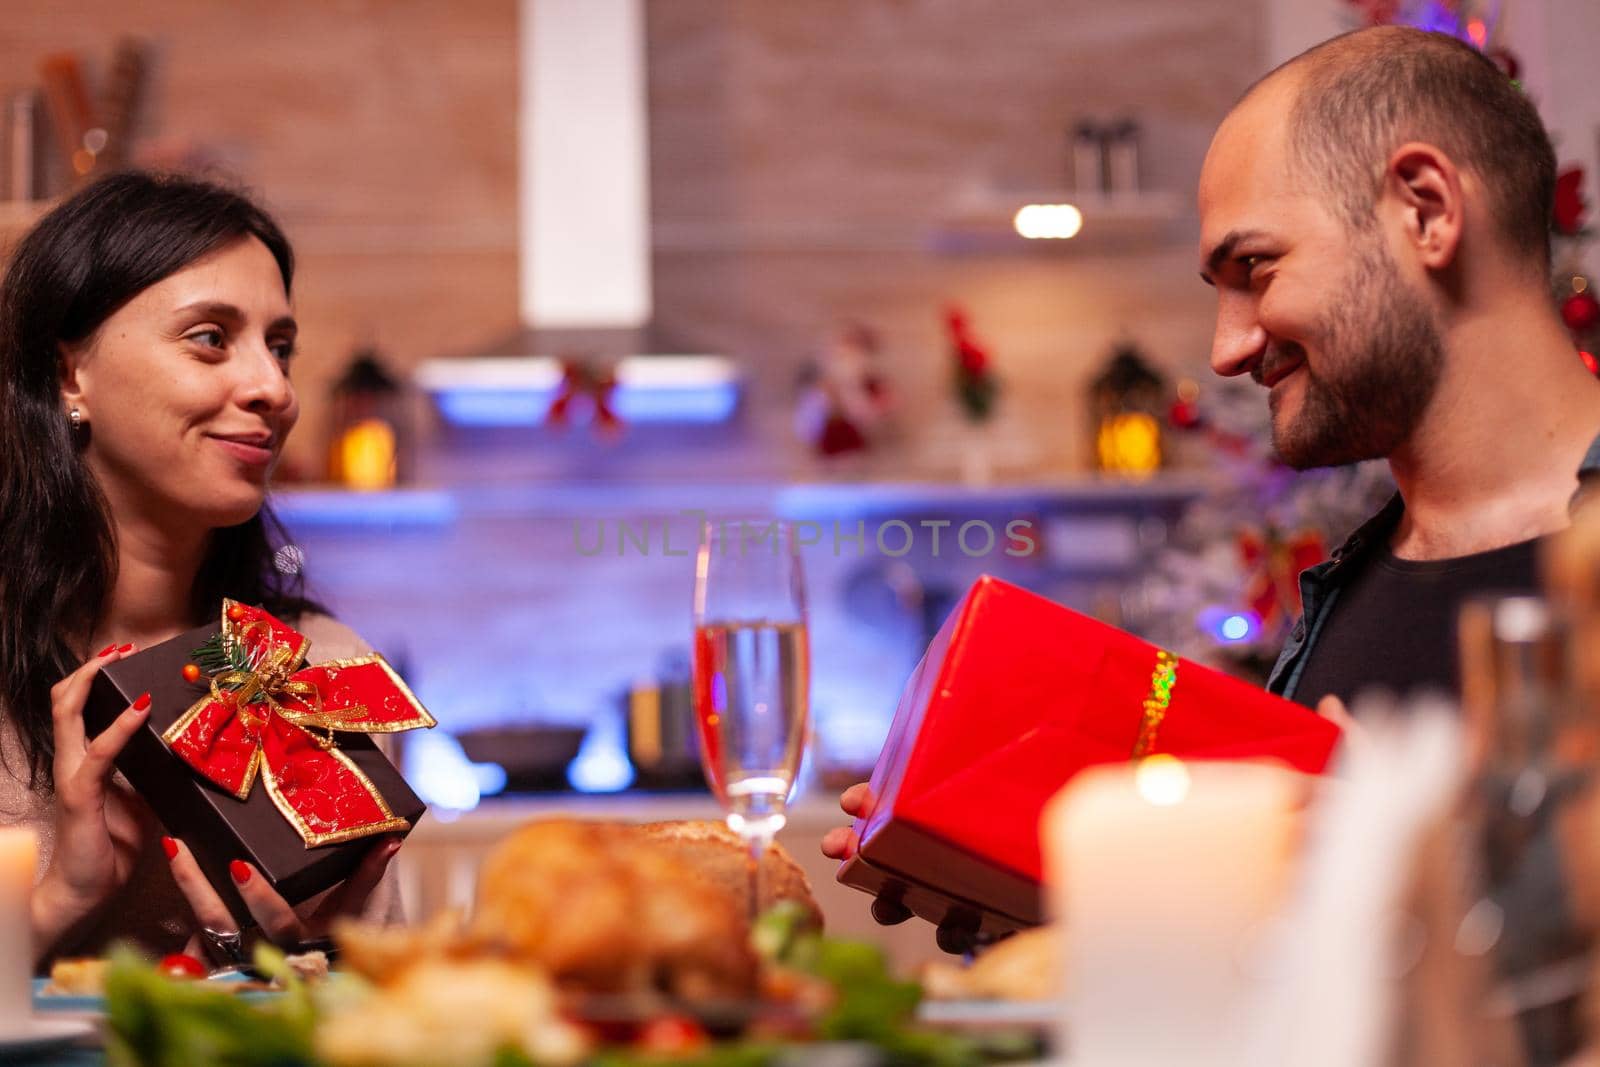 Happy couple surprising each other with present gift with ribbon on it enjoying christmastime together sitting at xmas table in decorated kitchen. Smiling family celebrating christmas season